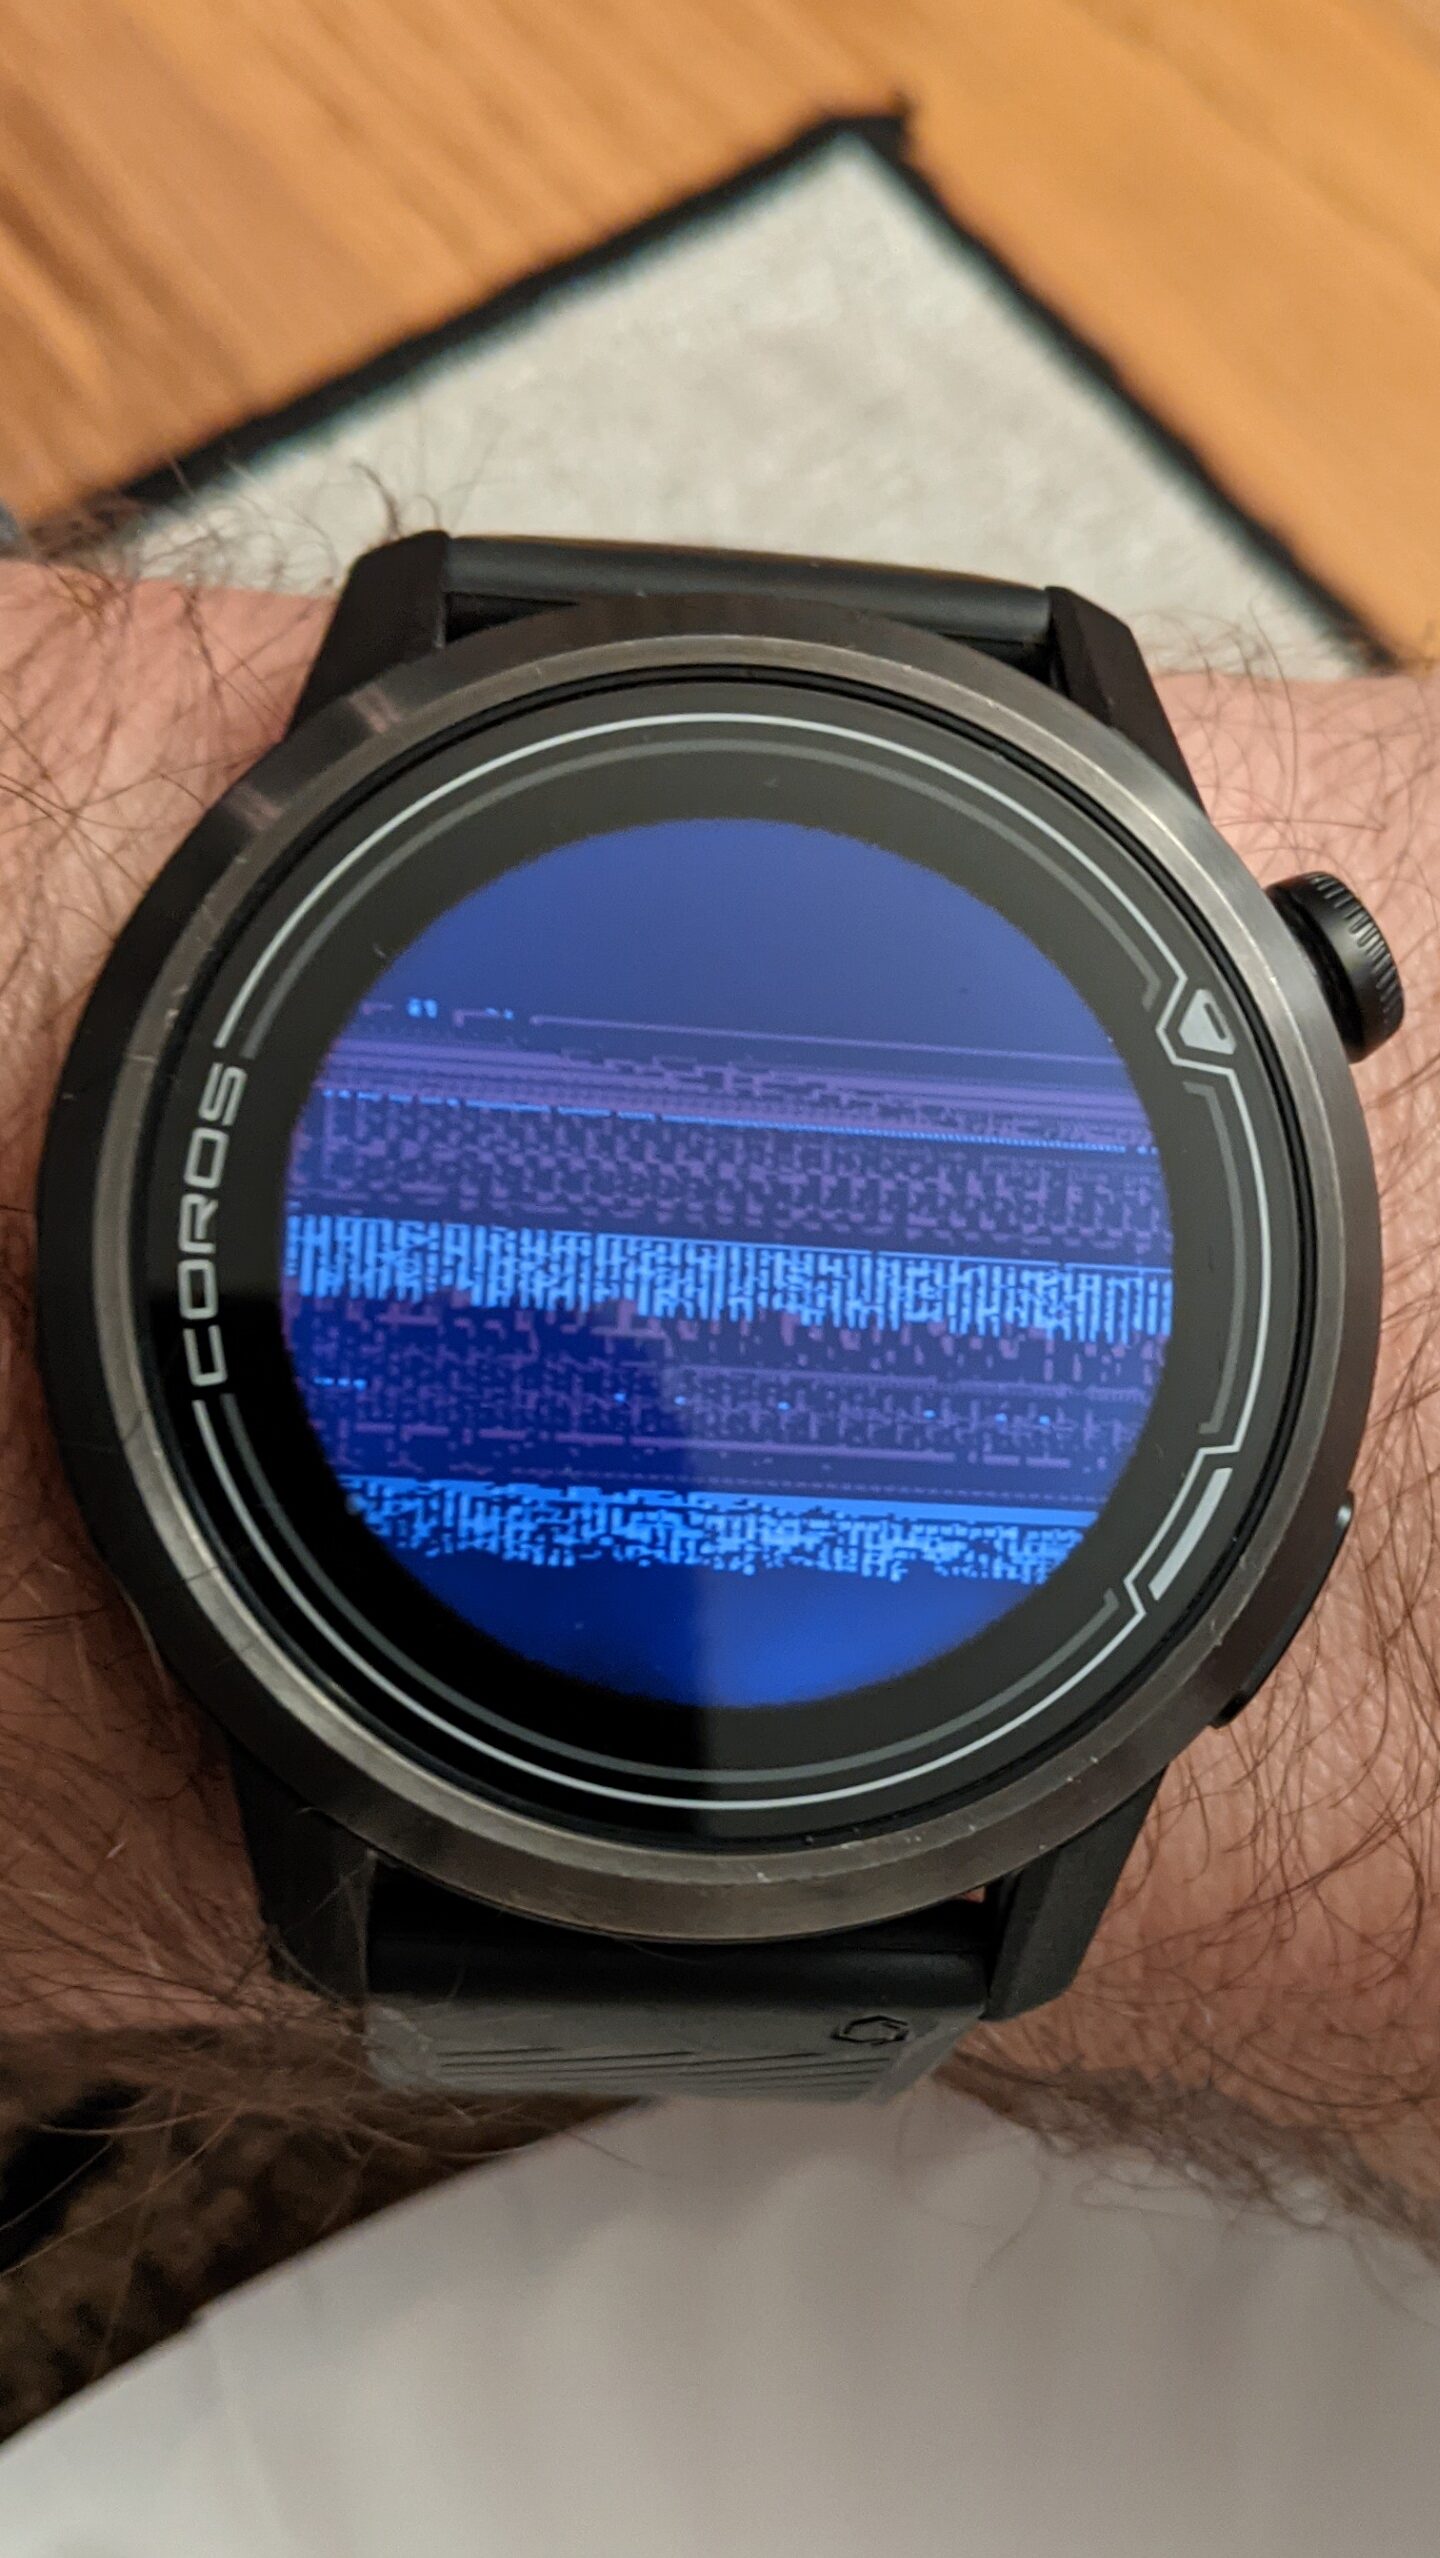 My running watch with a messed up display that renders it useless